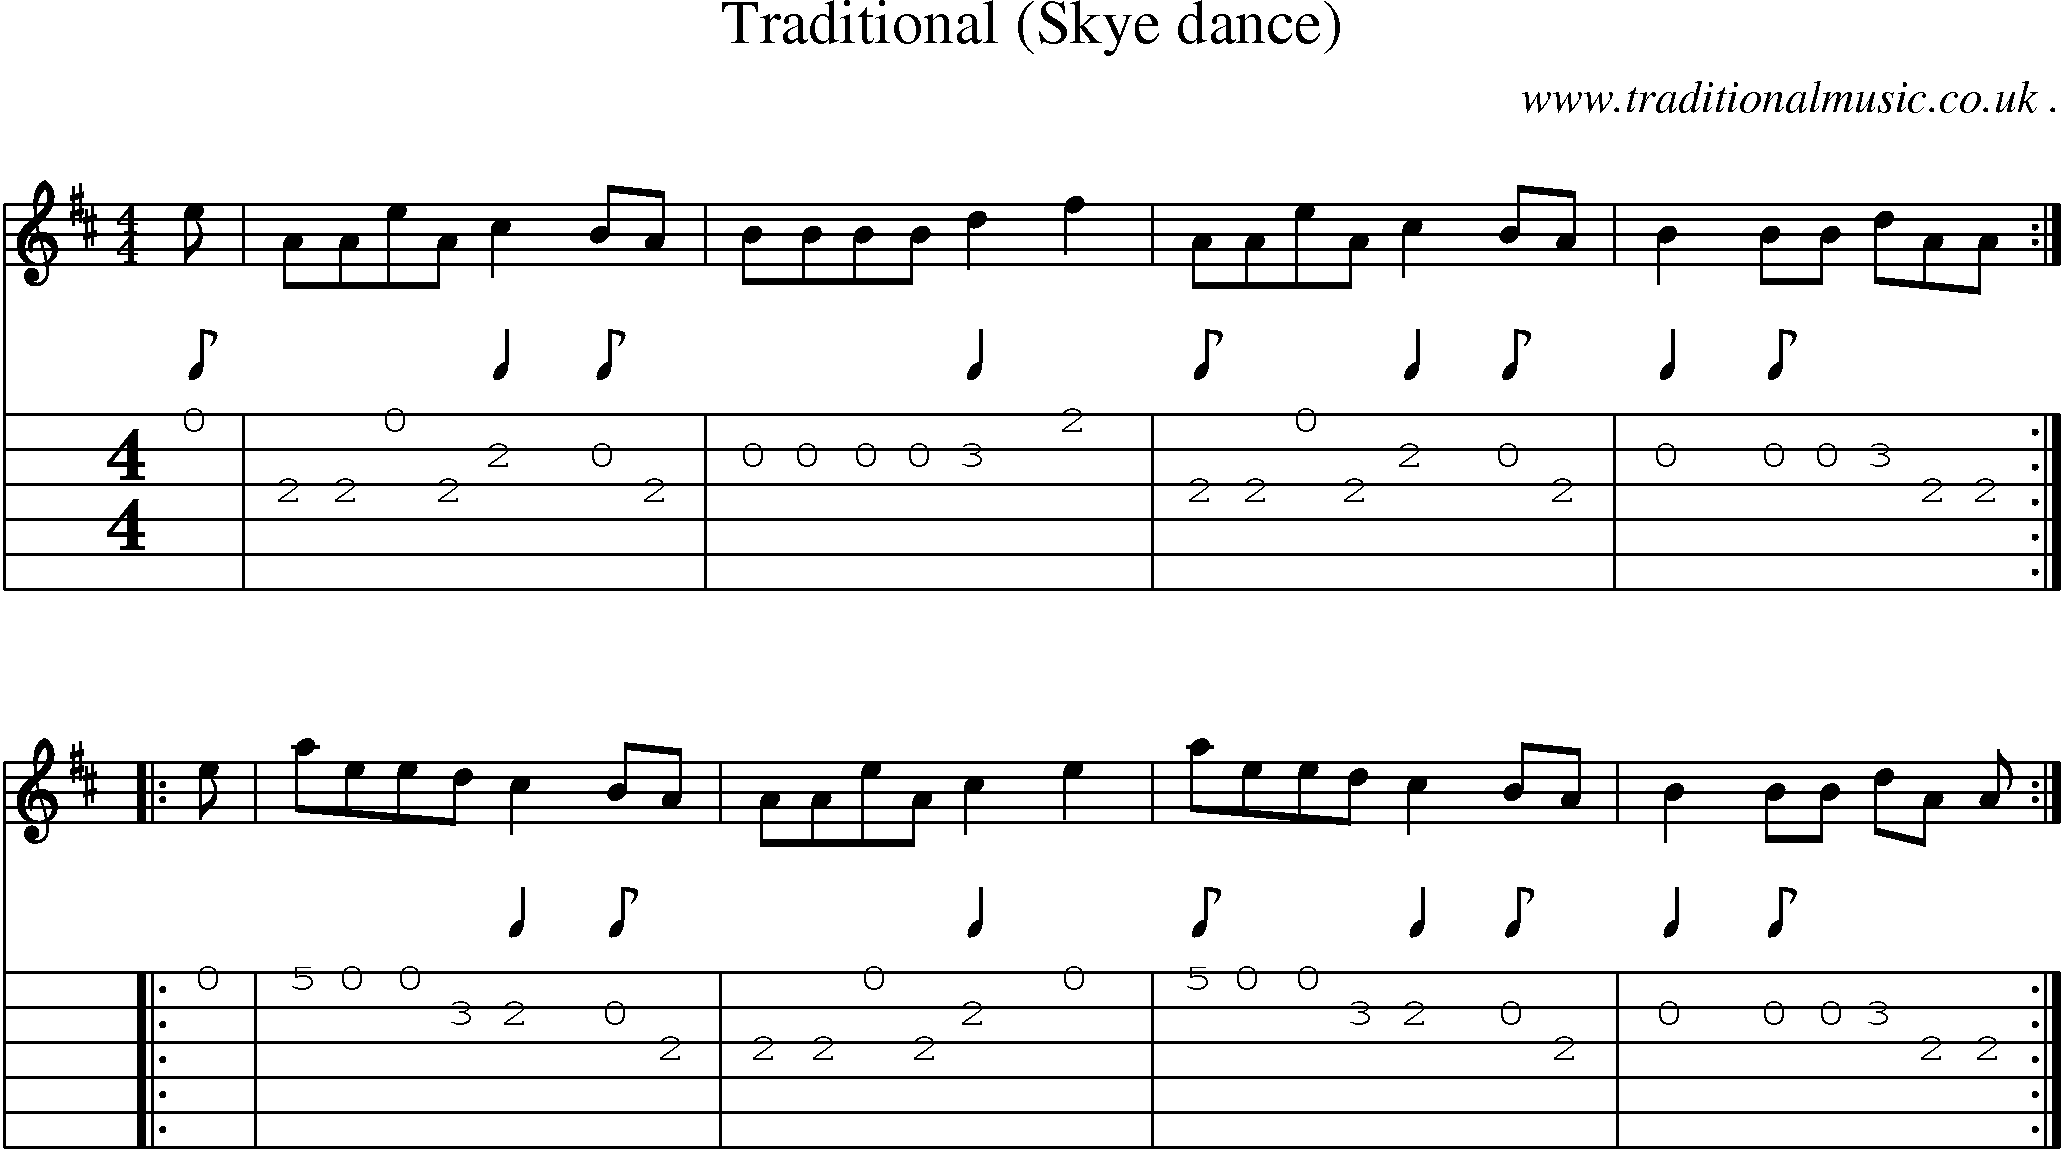 Sheet-music  score, Chords and Guitar Tabs for Traditional Skye Dance